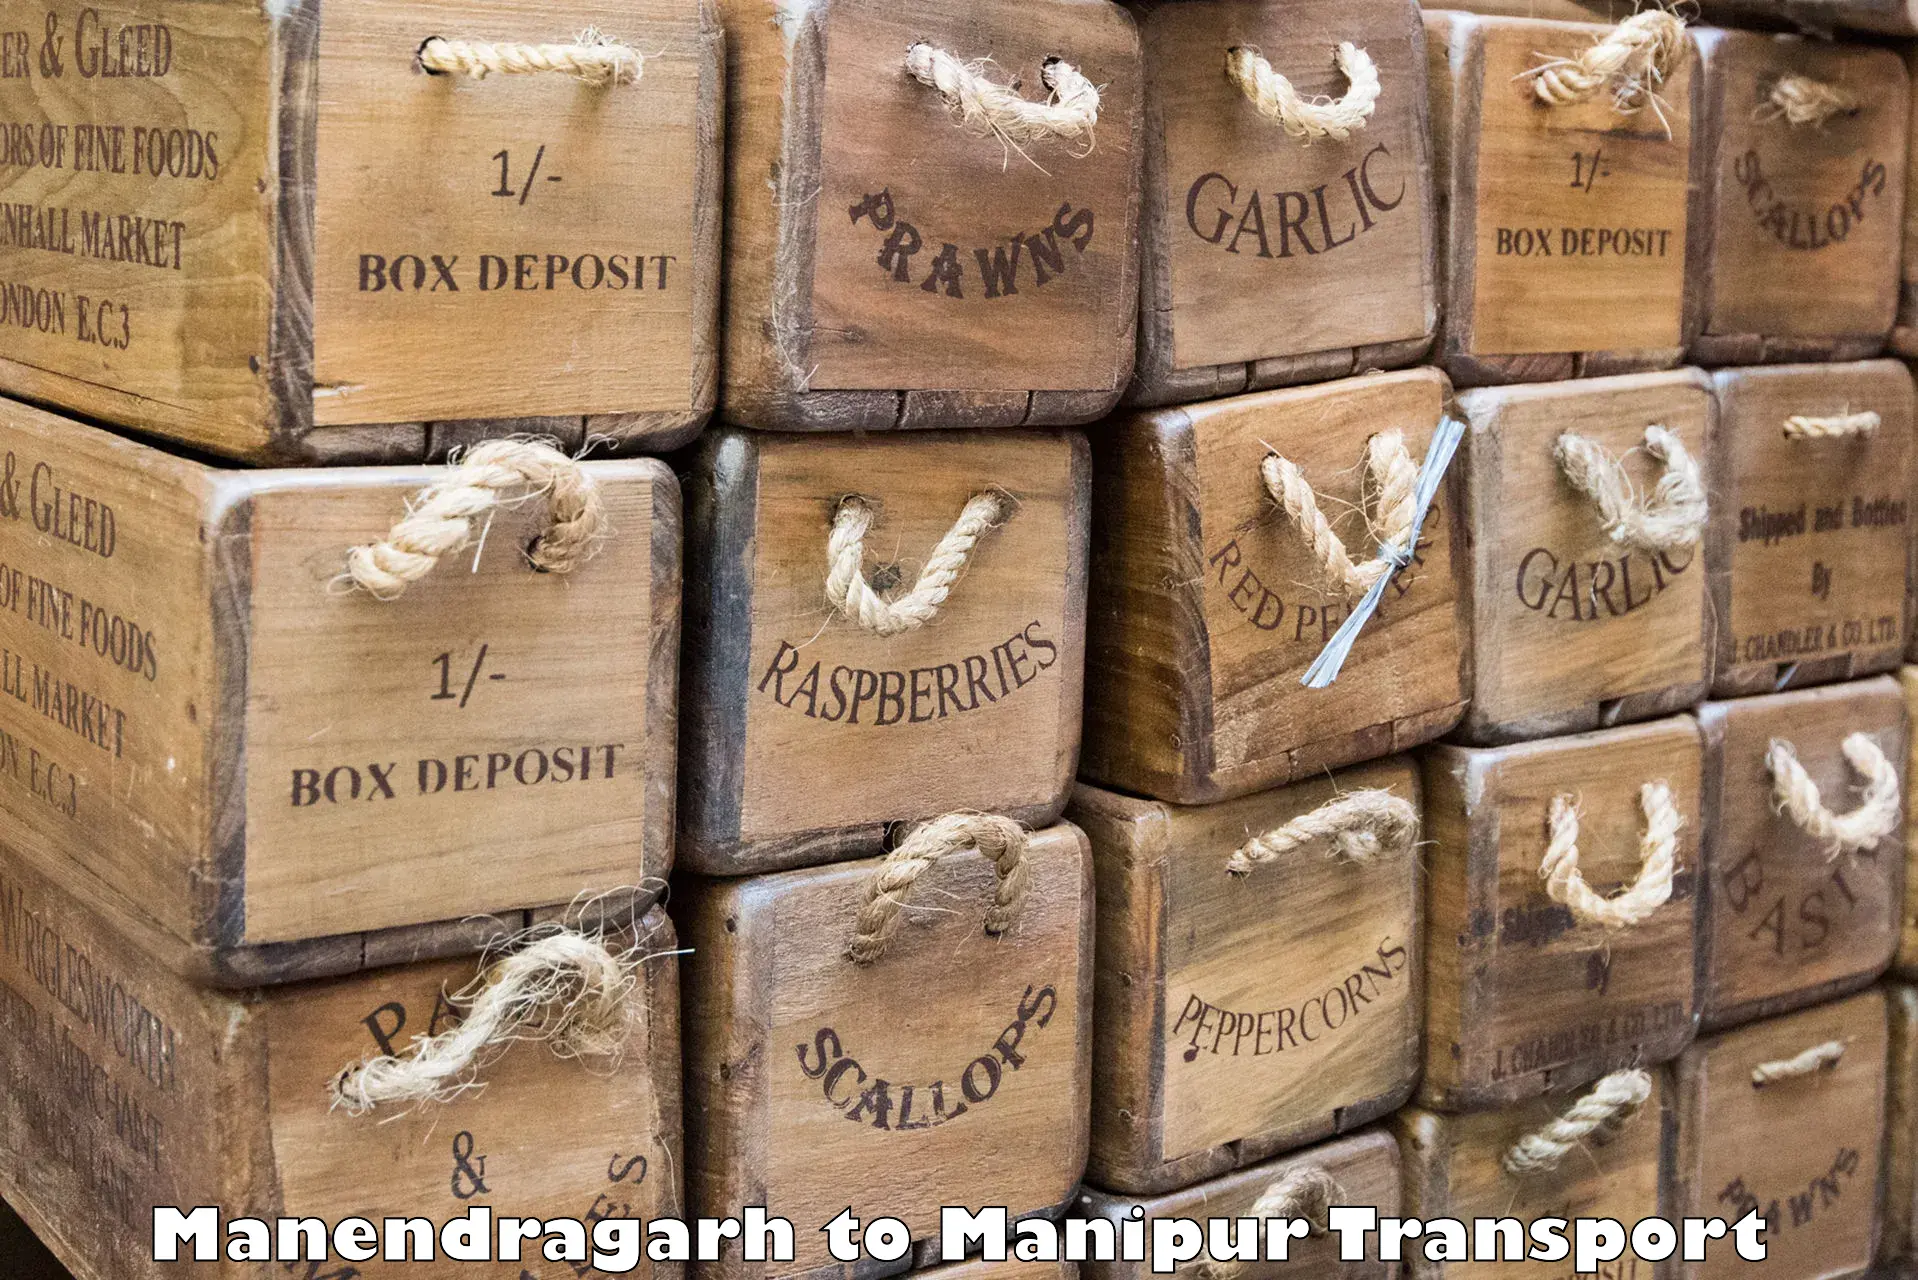 Container transport service Manendragarh to Manipur